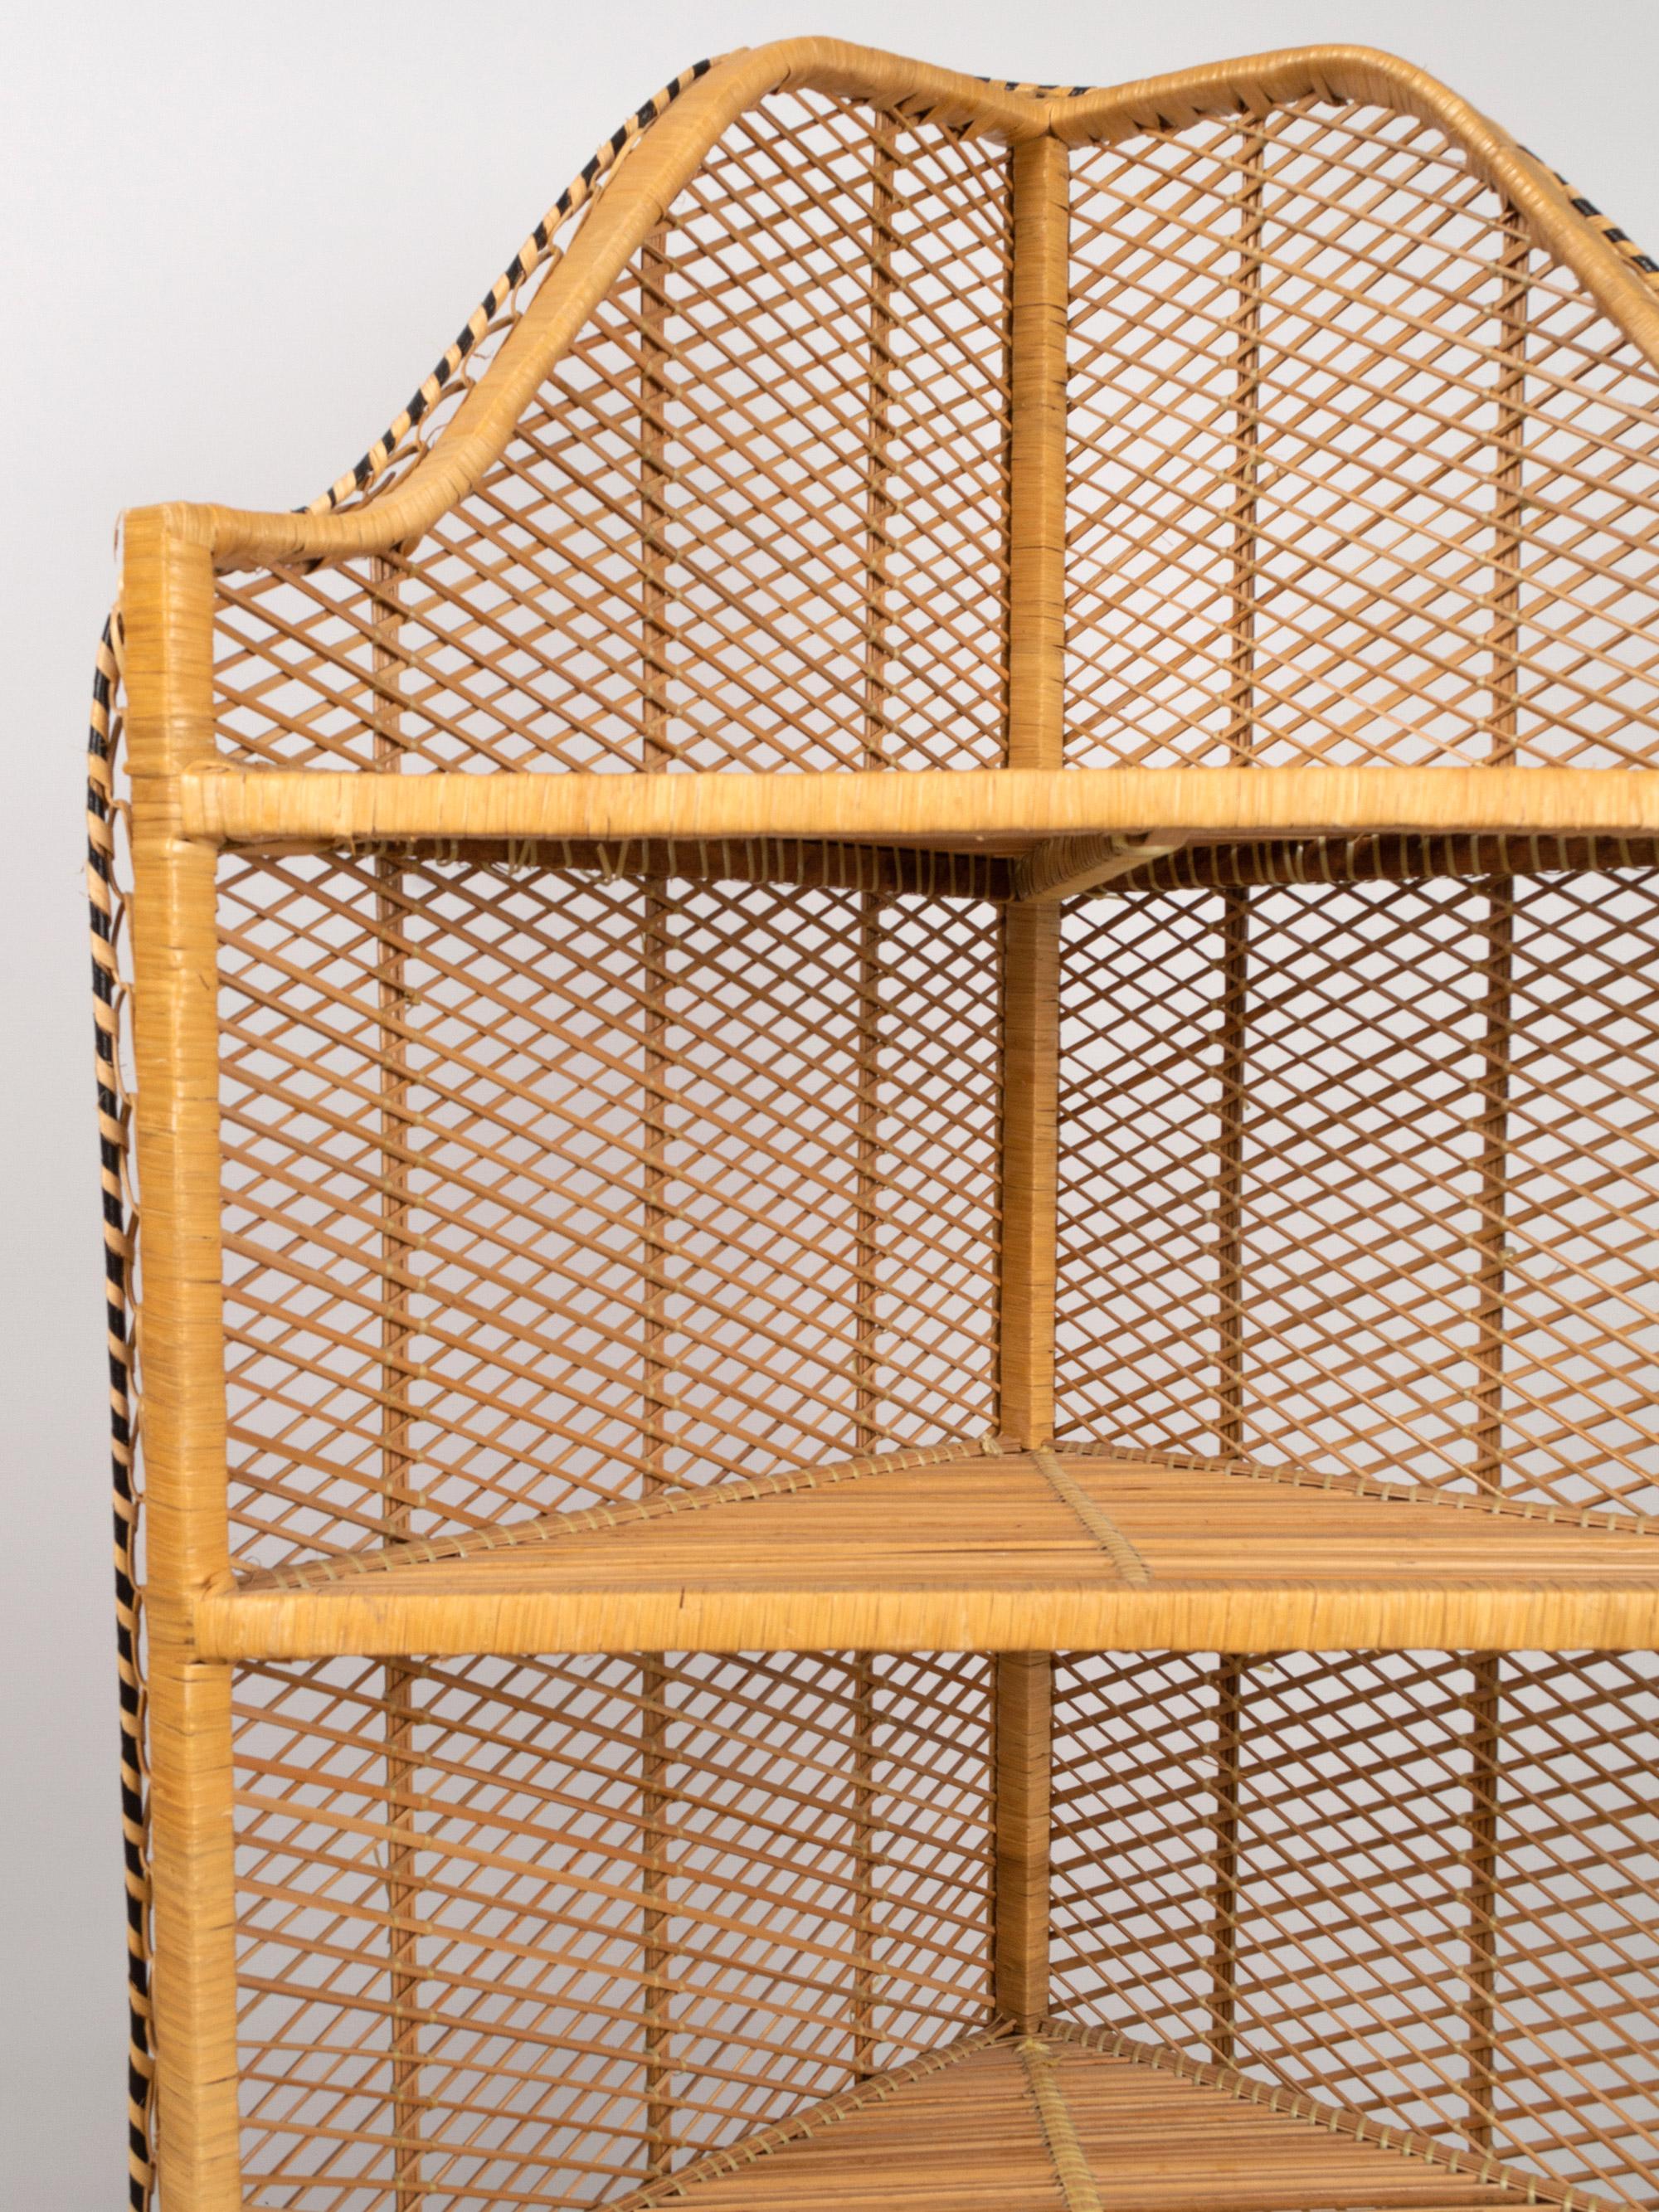 Vintage midcentury vintage rattan and wicker étagère. Freestanding corner rattan shelves in the manner of the ‘Emmanuelle’ chair, featuring four shelves. France, circa 1960.
Presented in excellent vintage condition, commensurate of age.